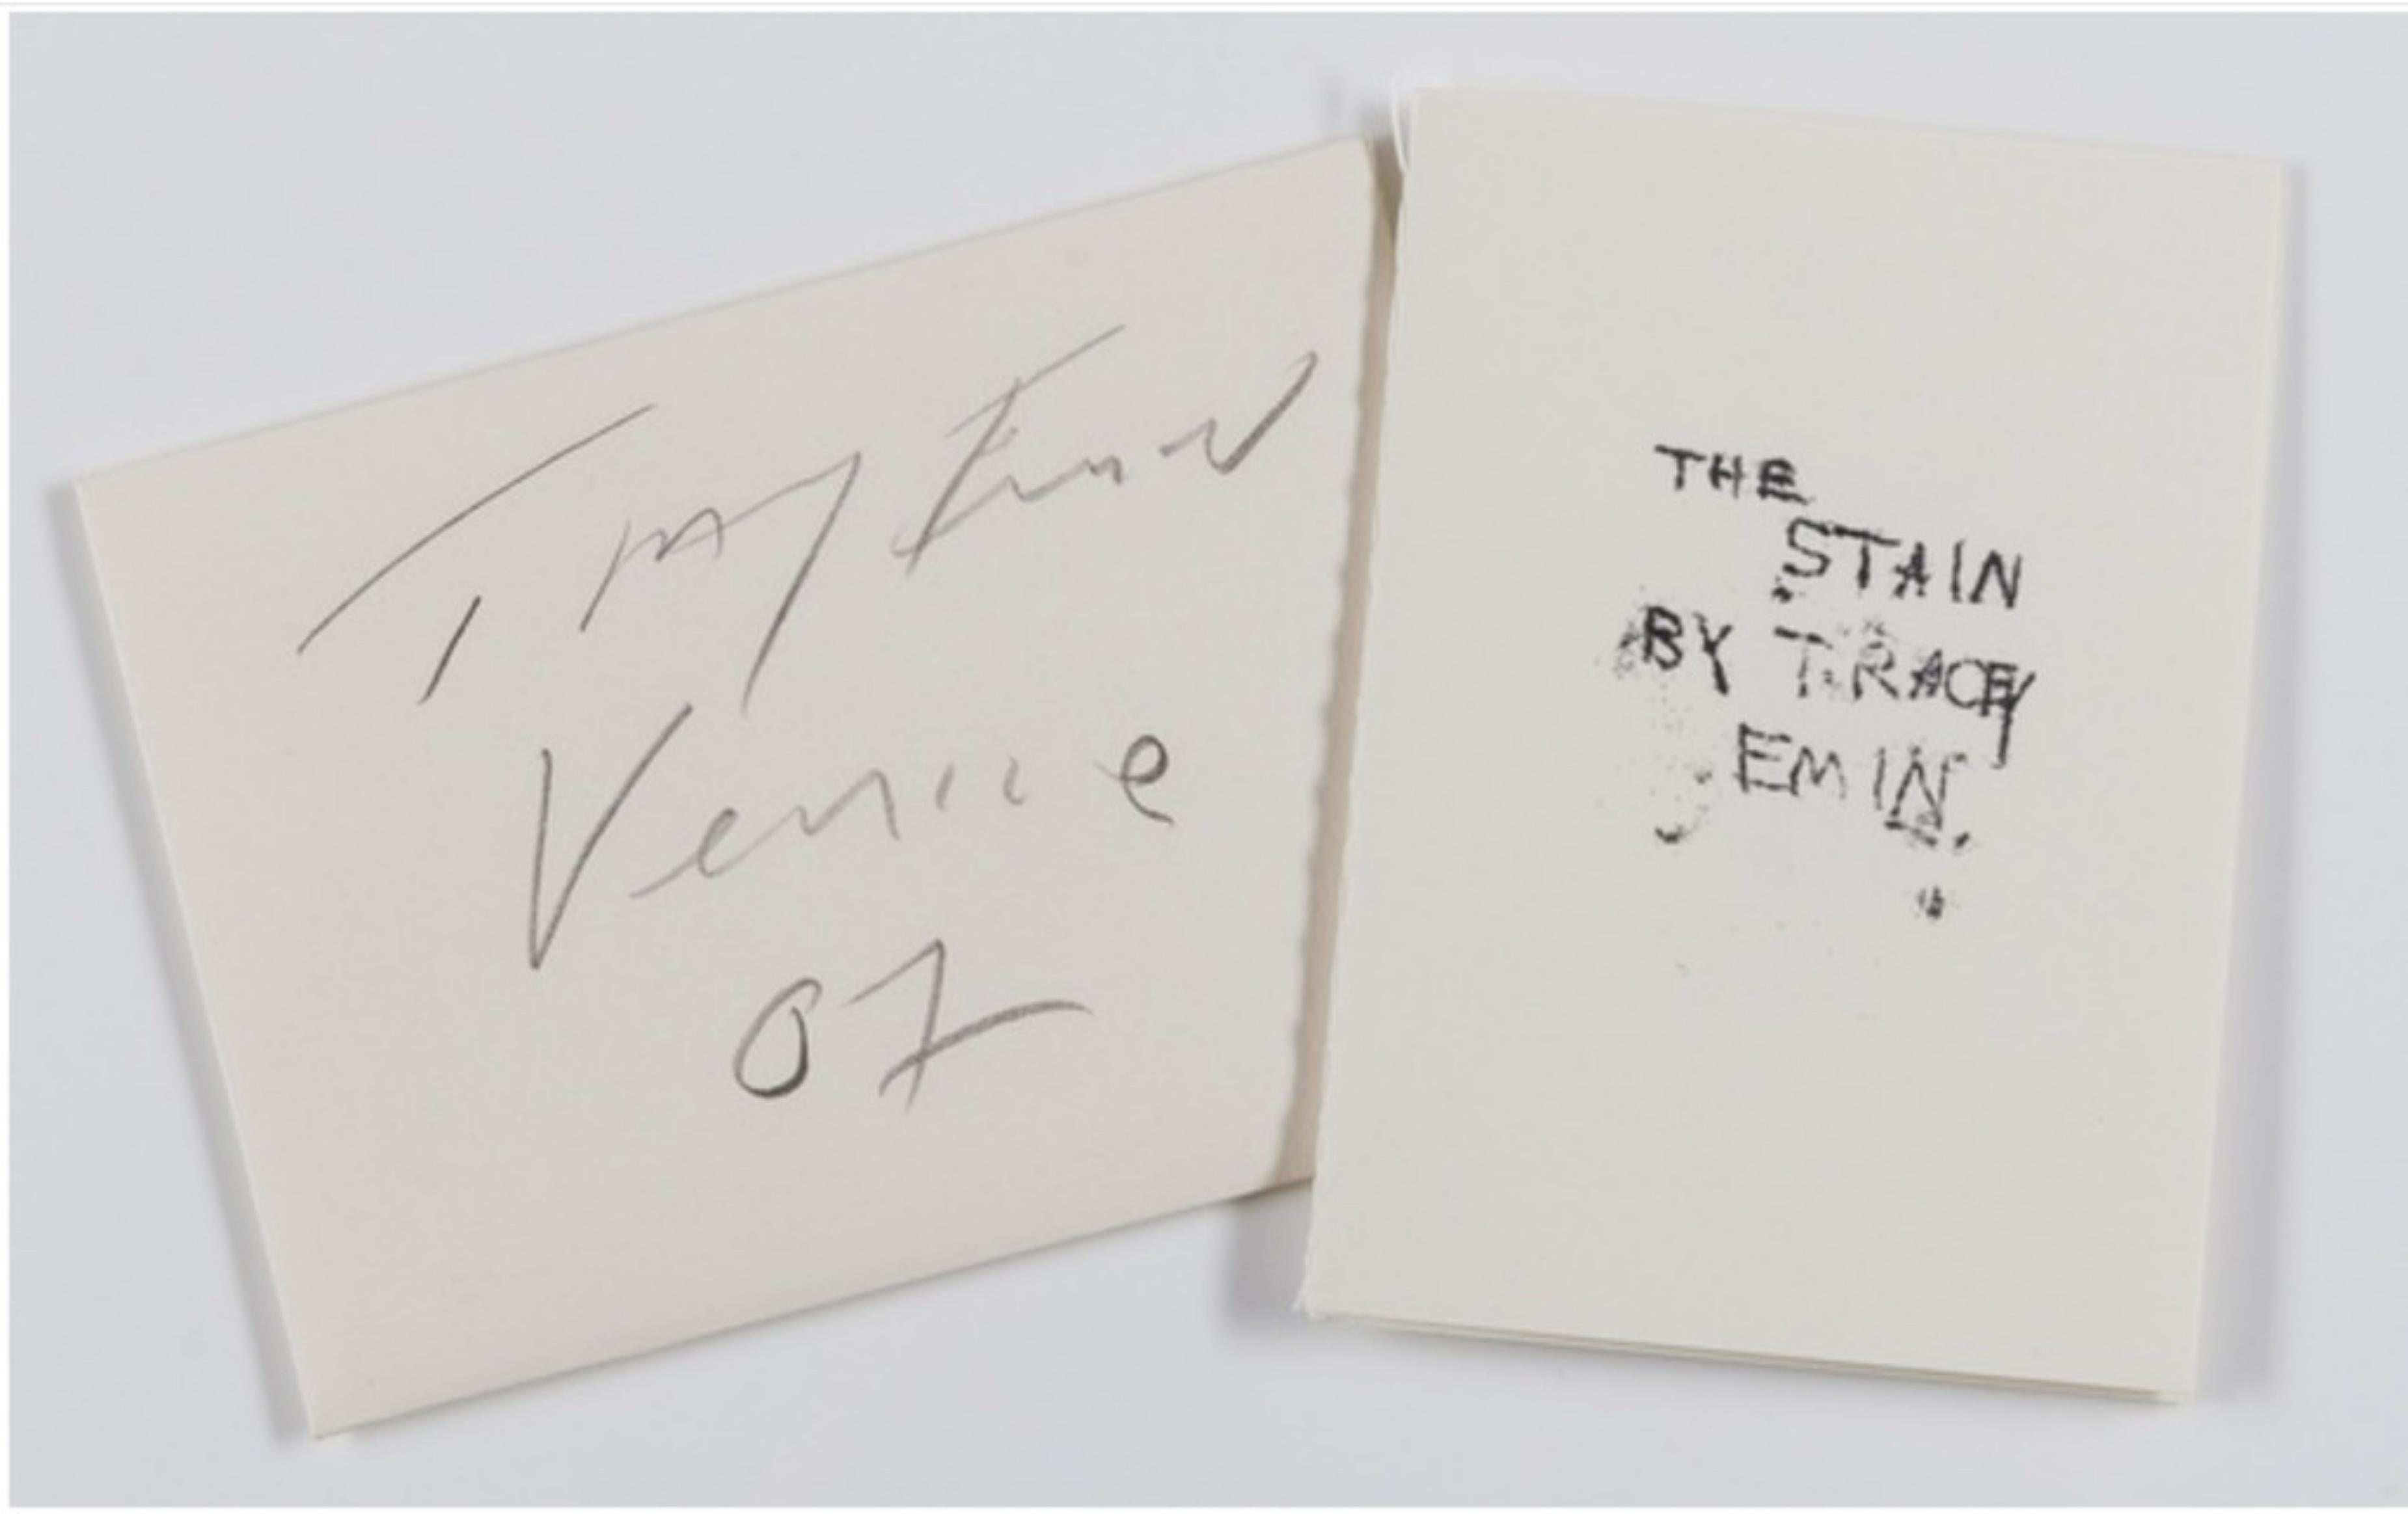 Tracey Emin Abstract Print - The Stain (Venice Biennial), limited edition with pencil signed envelope